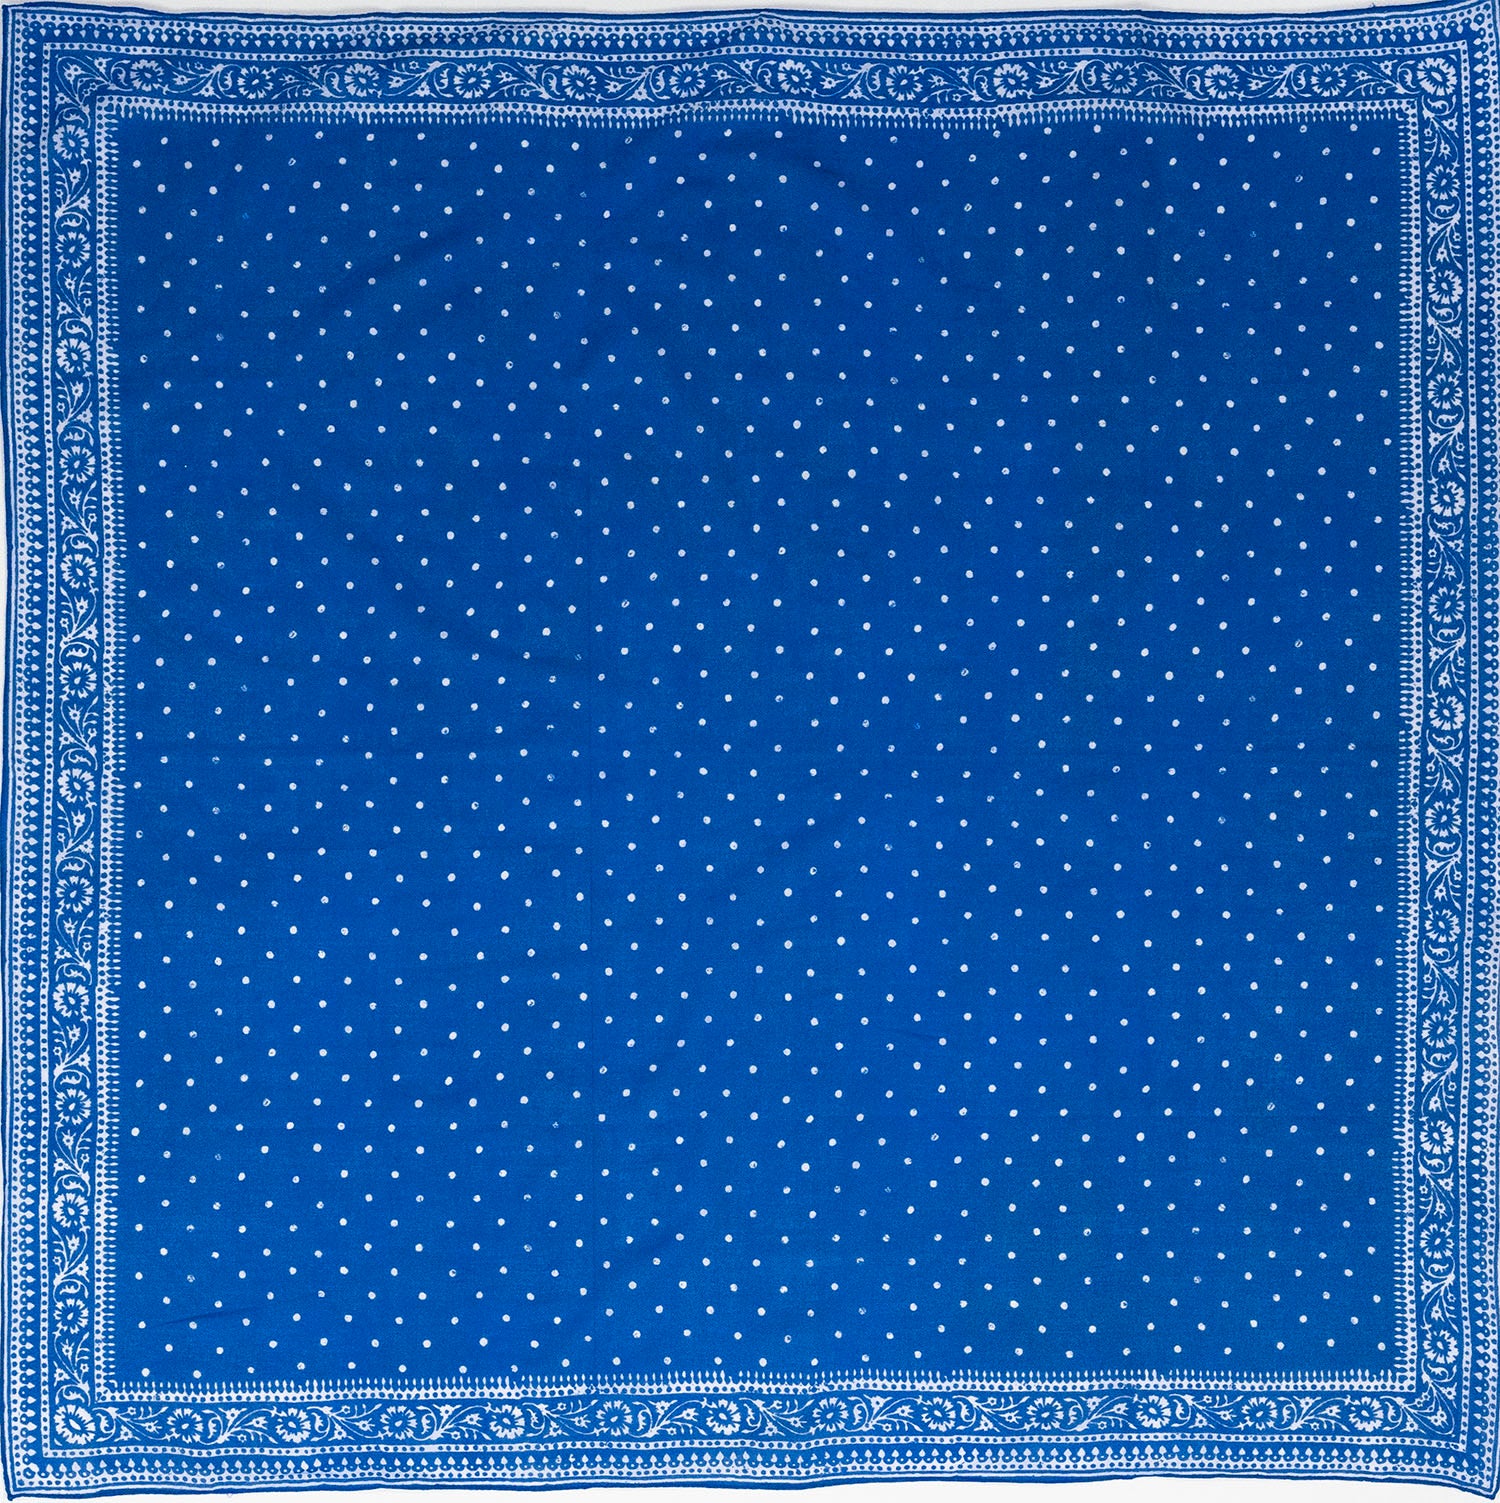 Blue Spotted Handkerchief with Border - Burnley & Trowbridge Co.